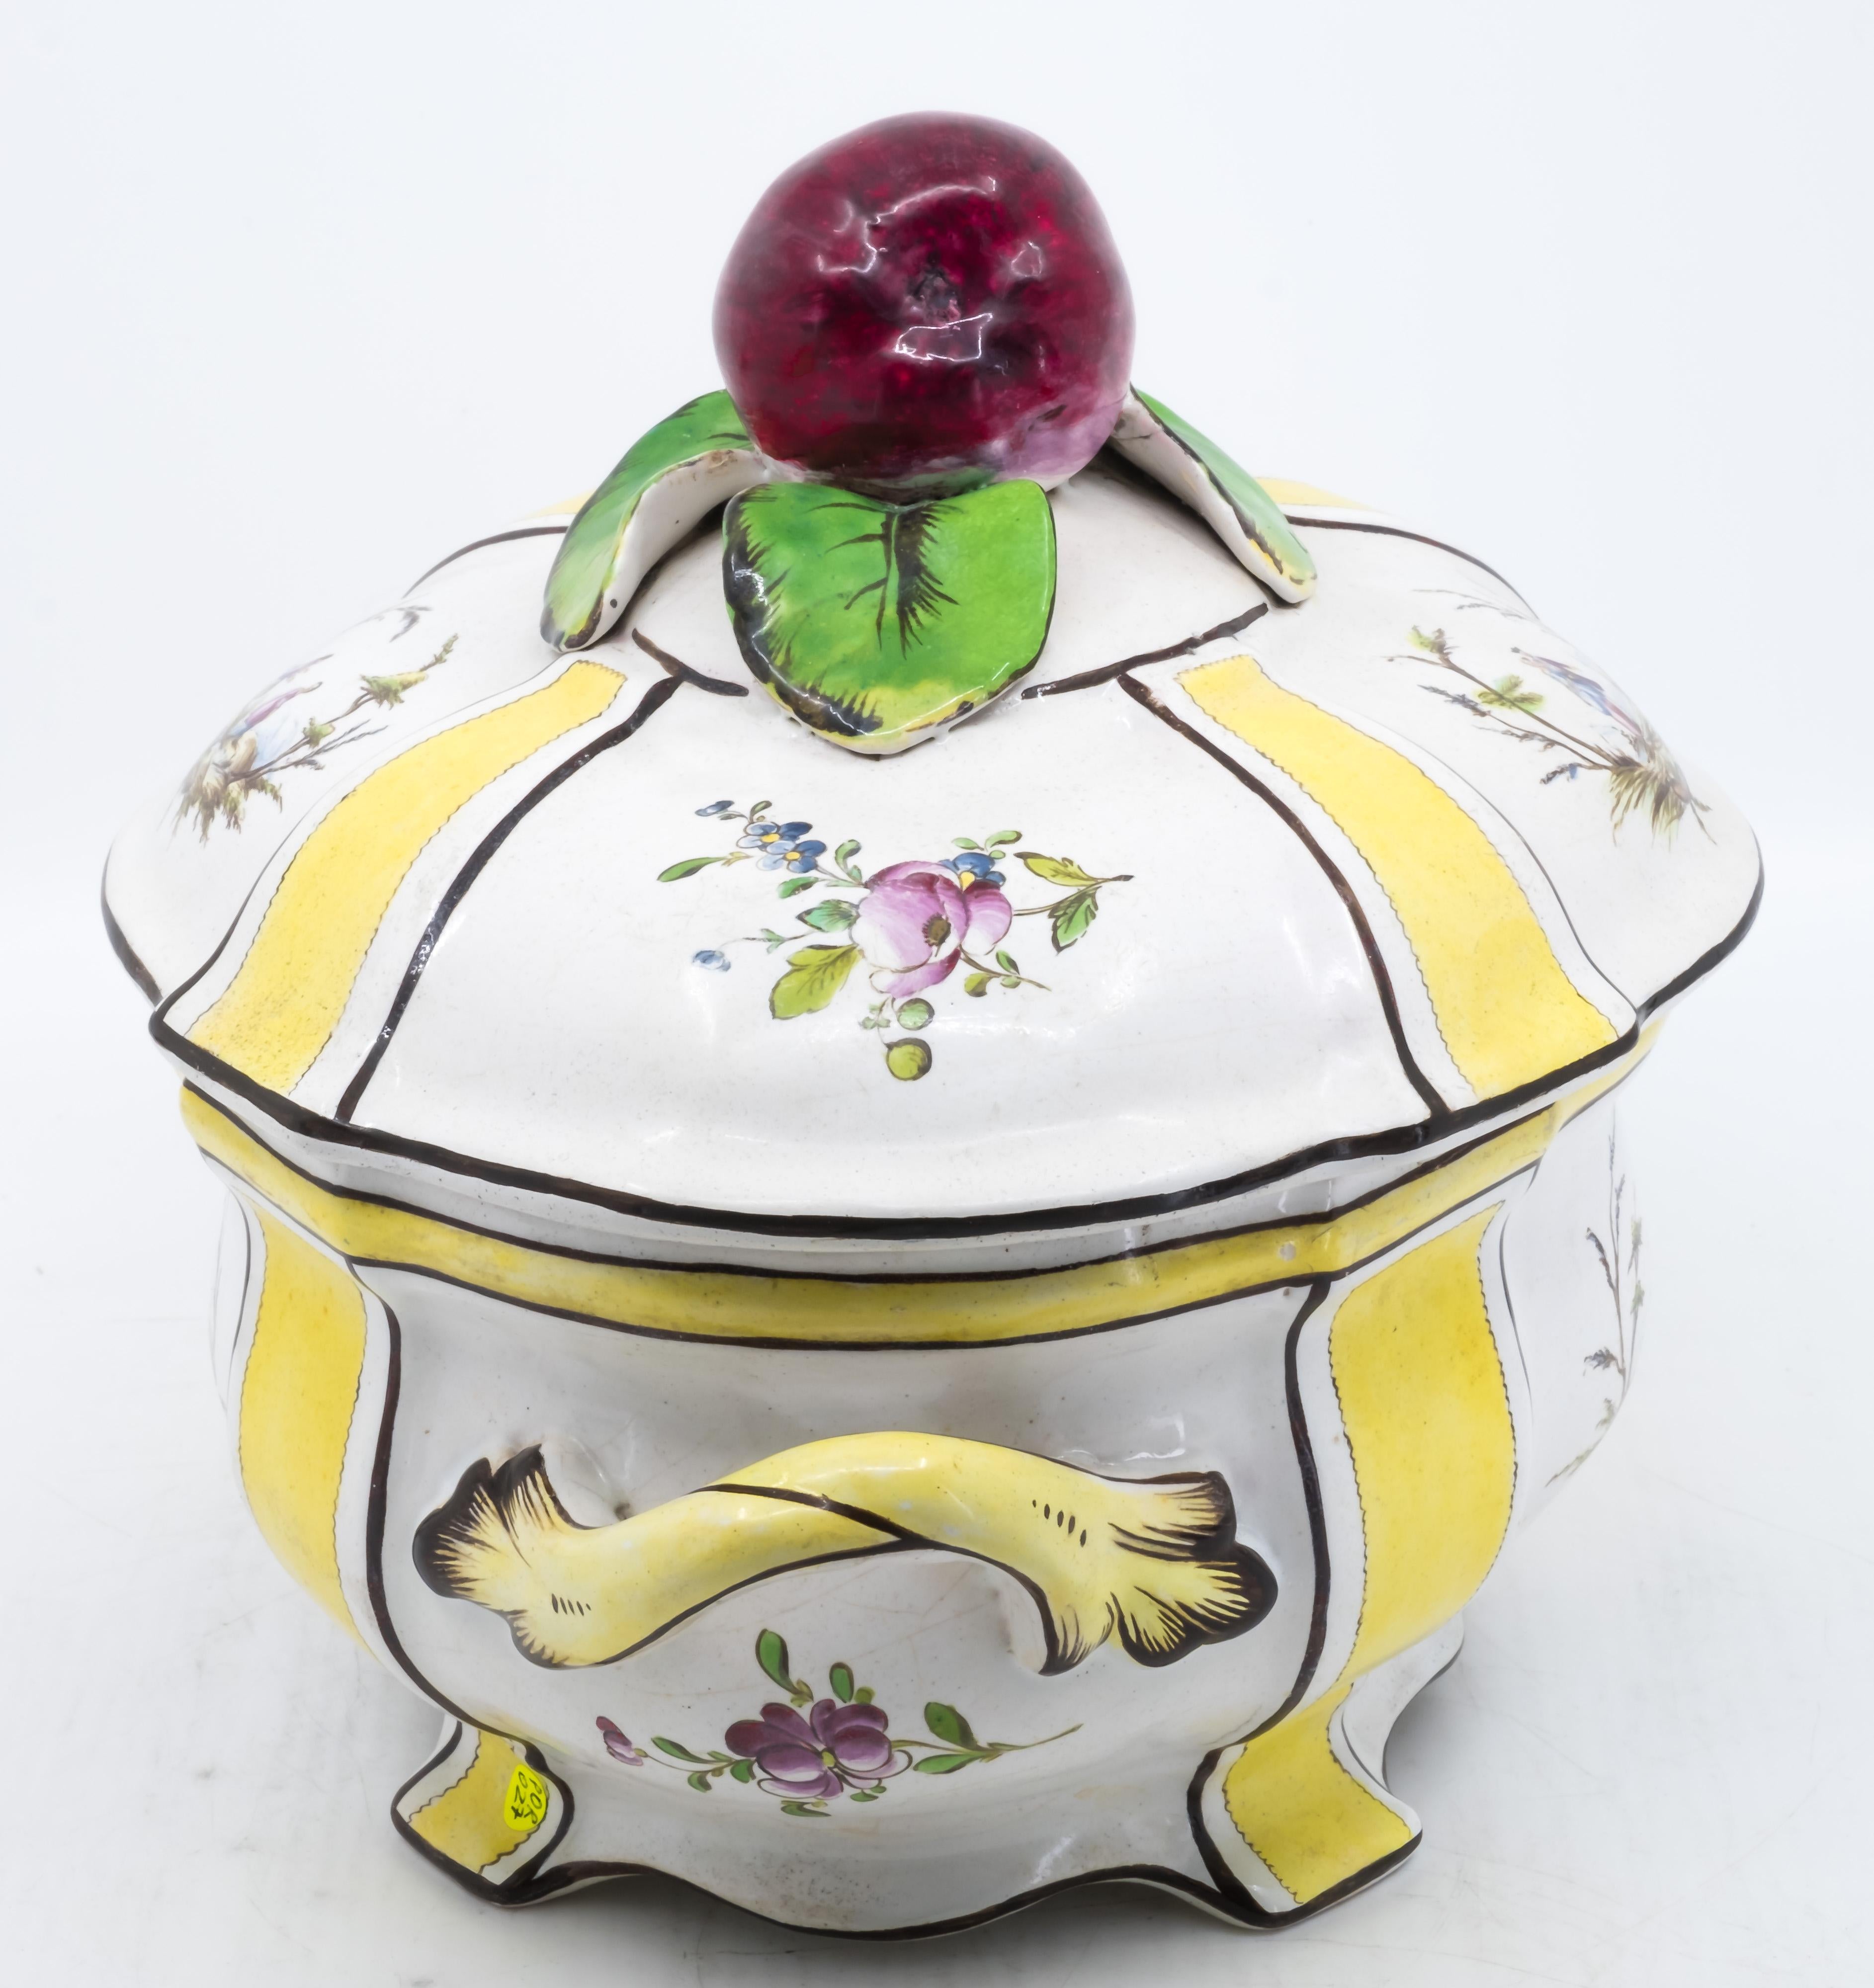 Yellow Tureen with Lid and Apple Finial, French, 19th Century (Handbemalt) im Angebot